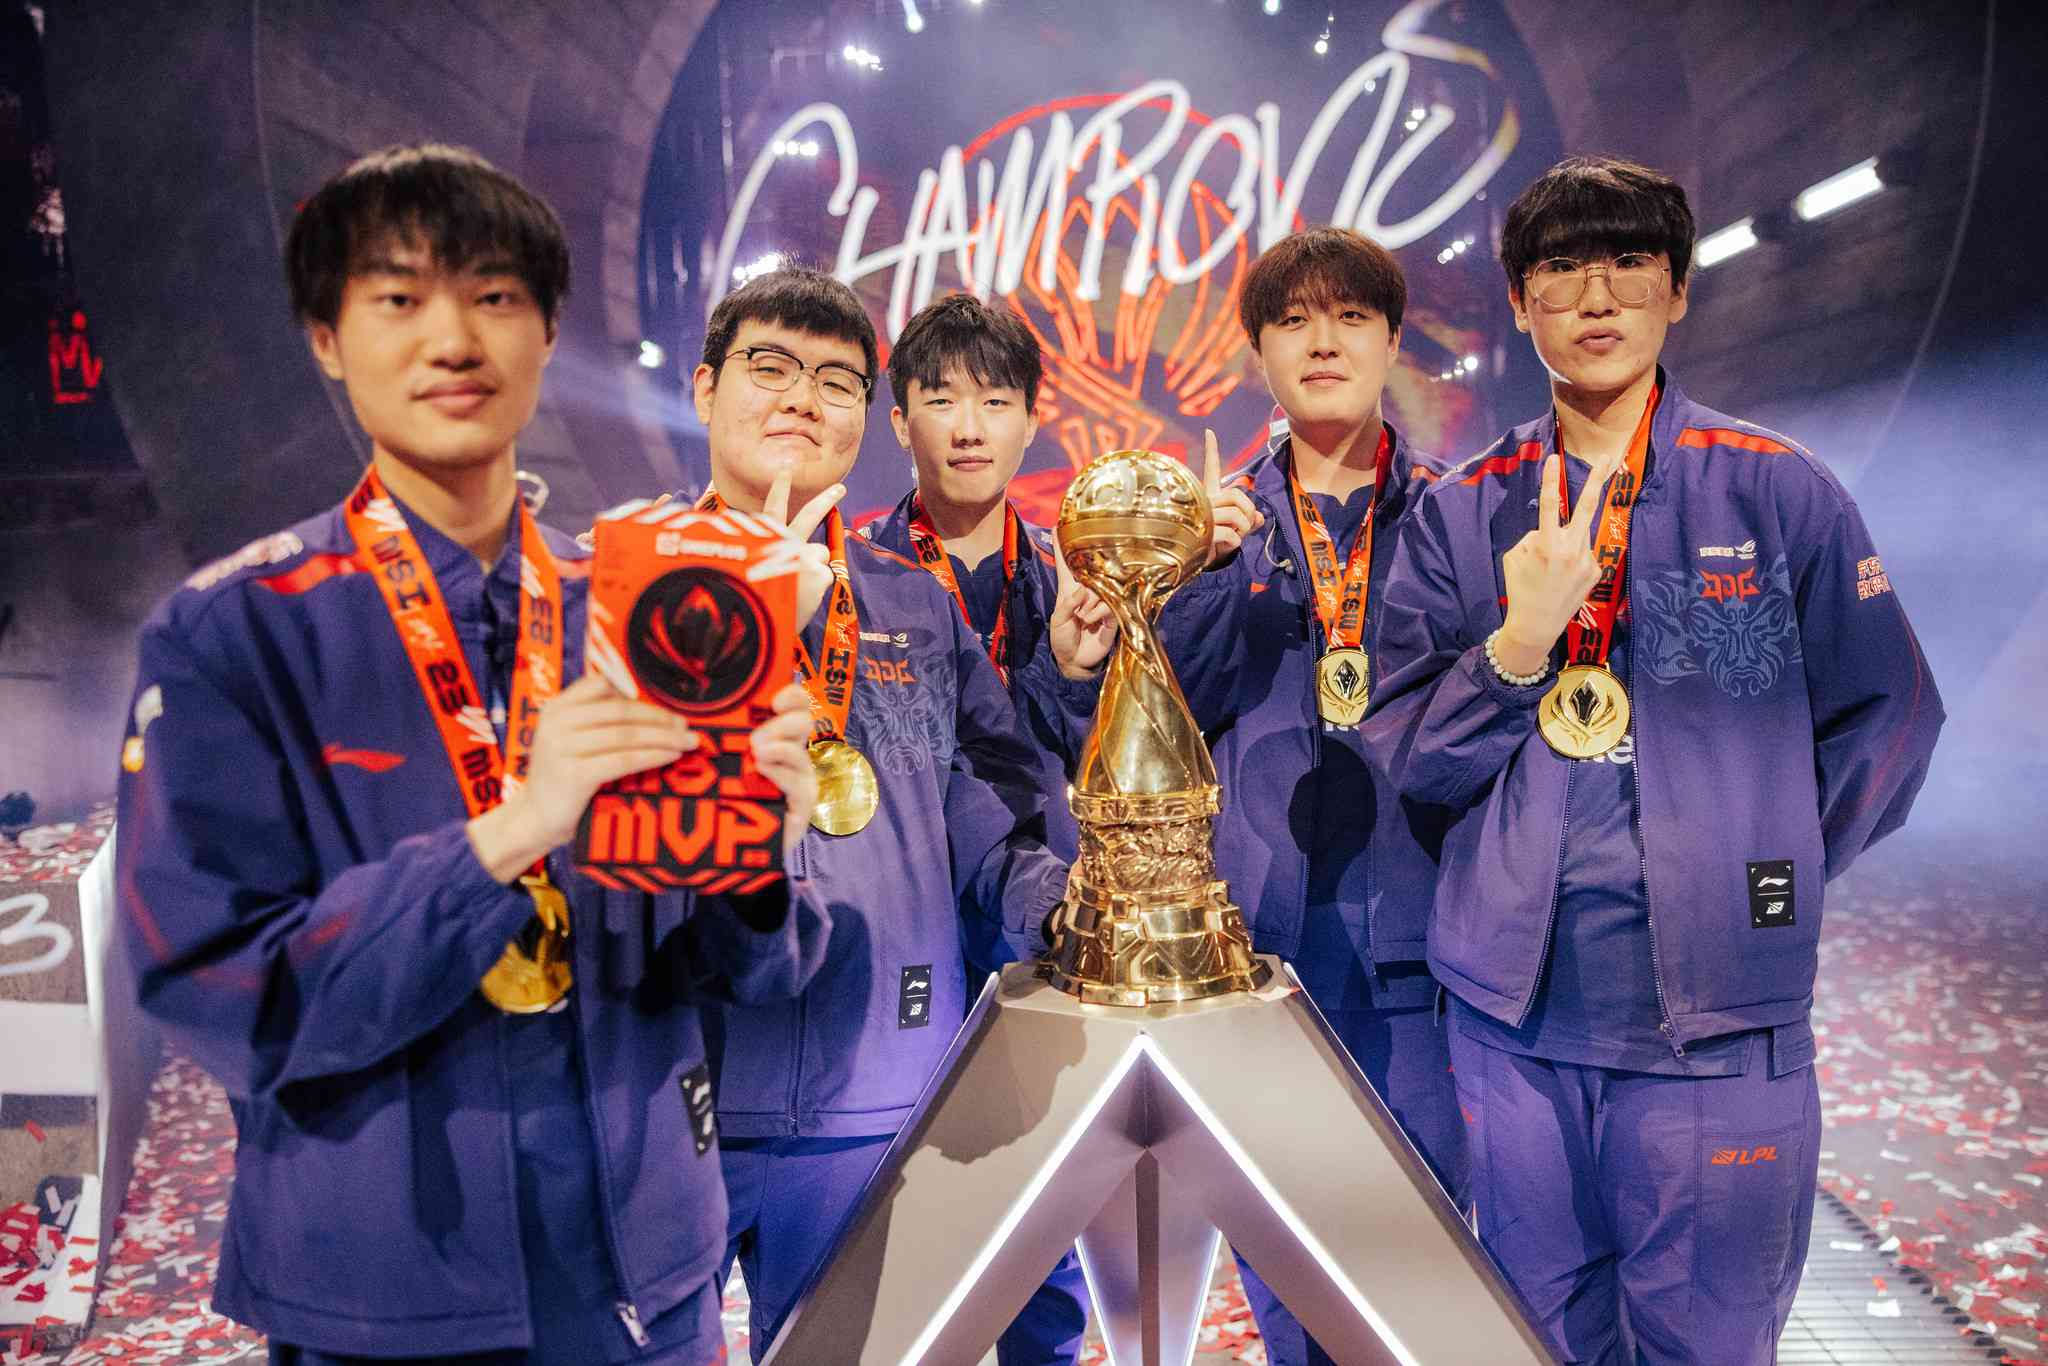 The JDG roster is considered one of the favorites after their MSI 2023 championship (Image Credits: Colin Young-Wolff/Riot Games)